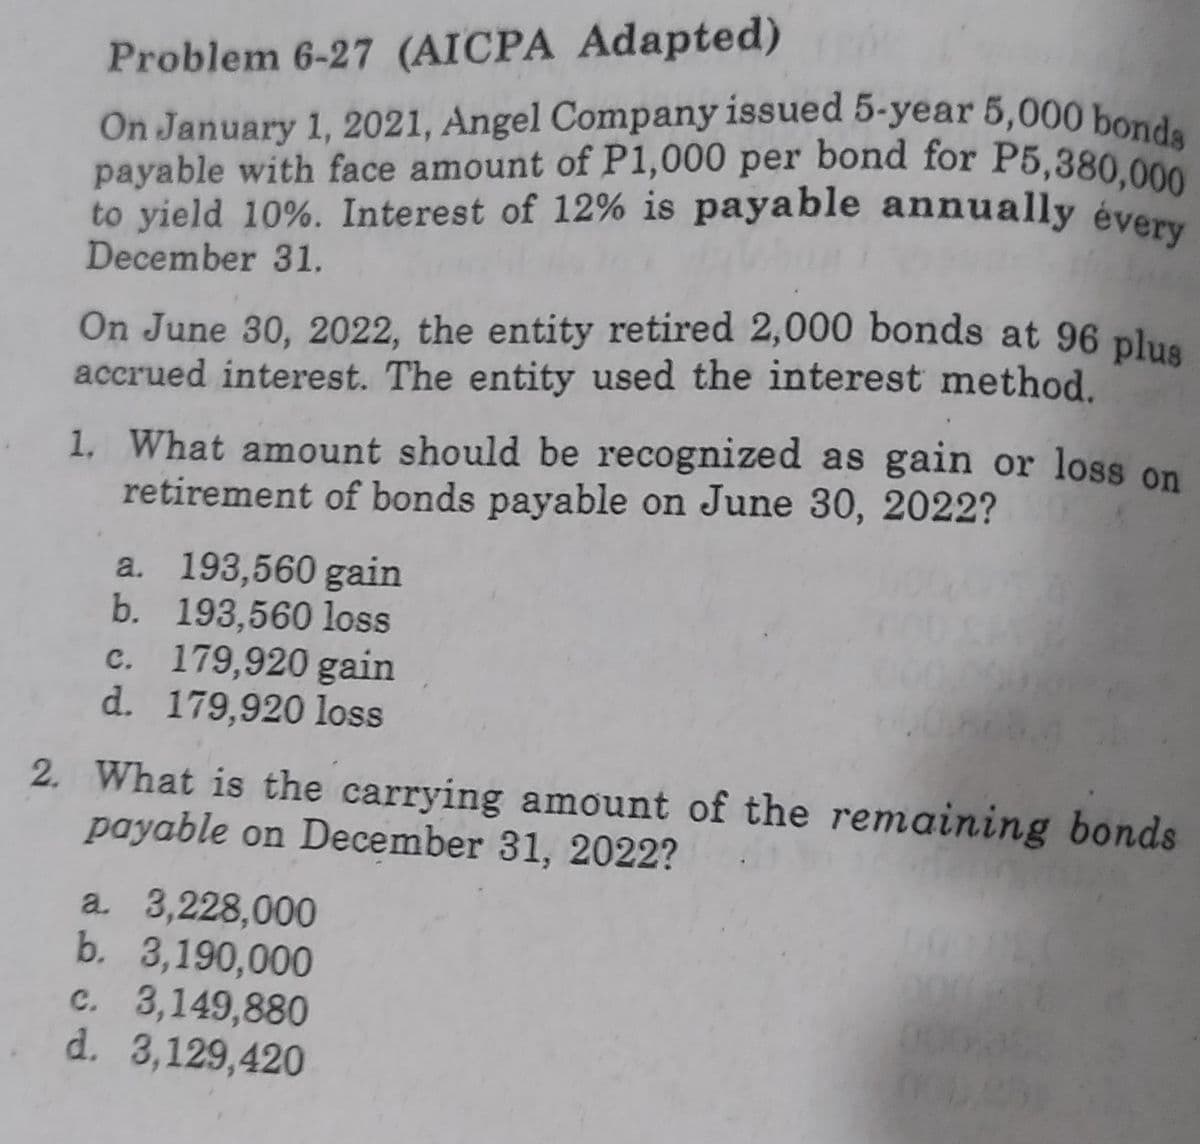 Problem 6-27 (AICPA Adapted)
On January 1, 2021, Angel Company issued 5-year 5,000 bonds
payable with face amount of P1,000 per bond for P5,380,000
to yield 10%. Interest of 12% is payable annually every
December 31.
On June 30, 2022, the entity retired 2,000 bonds at 96 plus
accrued interest. The entity used the interest method.
1. What amount should be recognized as gain or loss on
retirement of bonds payable on June 30, 2022?
a. 193,560 gain
b. 193,560 loss
c. 179,920 gain
d. 179,920 loss
2. What is the carrying amount of the remaining bonds
payable on December 31, 2022?
a. 3,228,000
b. 3,190,000
c. 3,149,880
d. 3,129,420
251